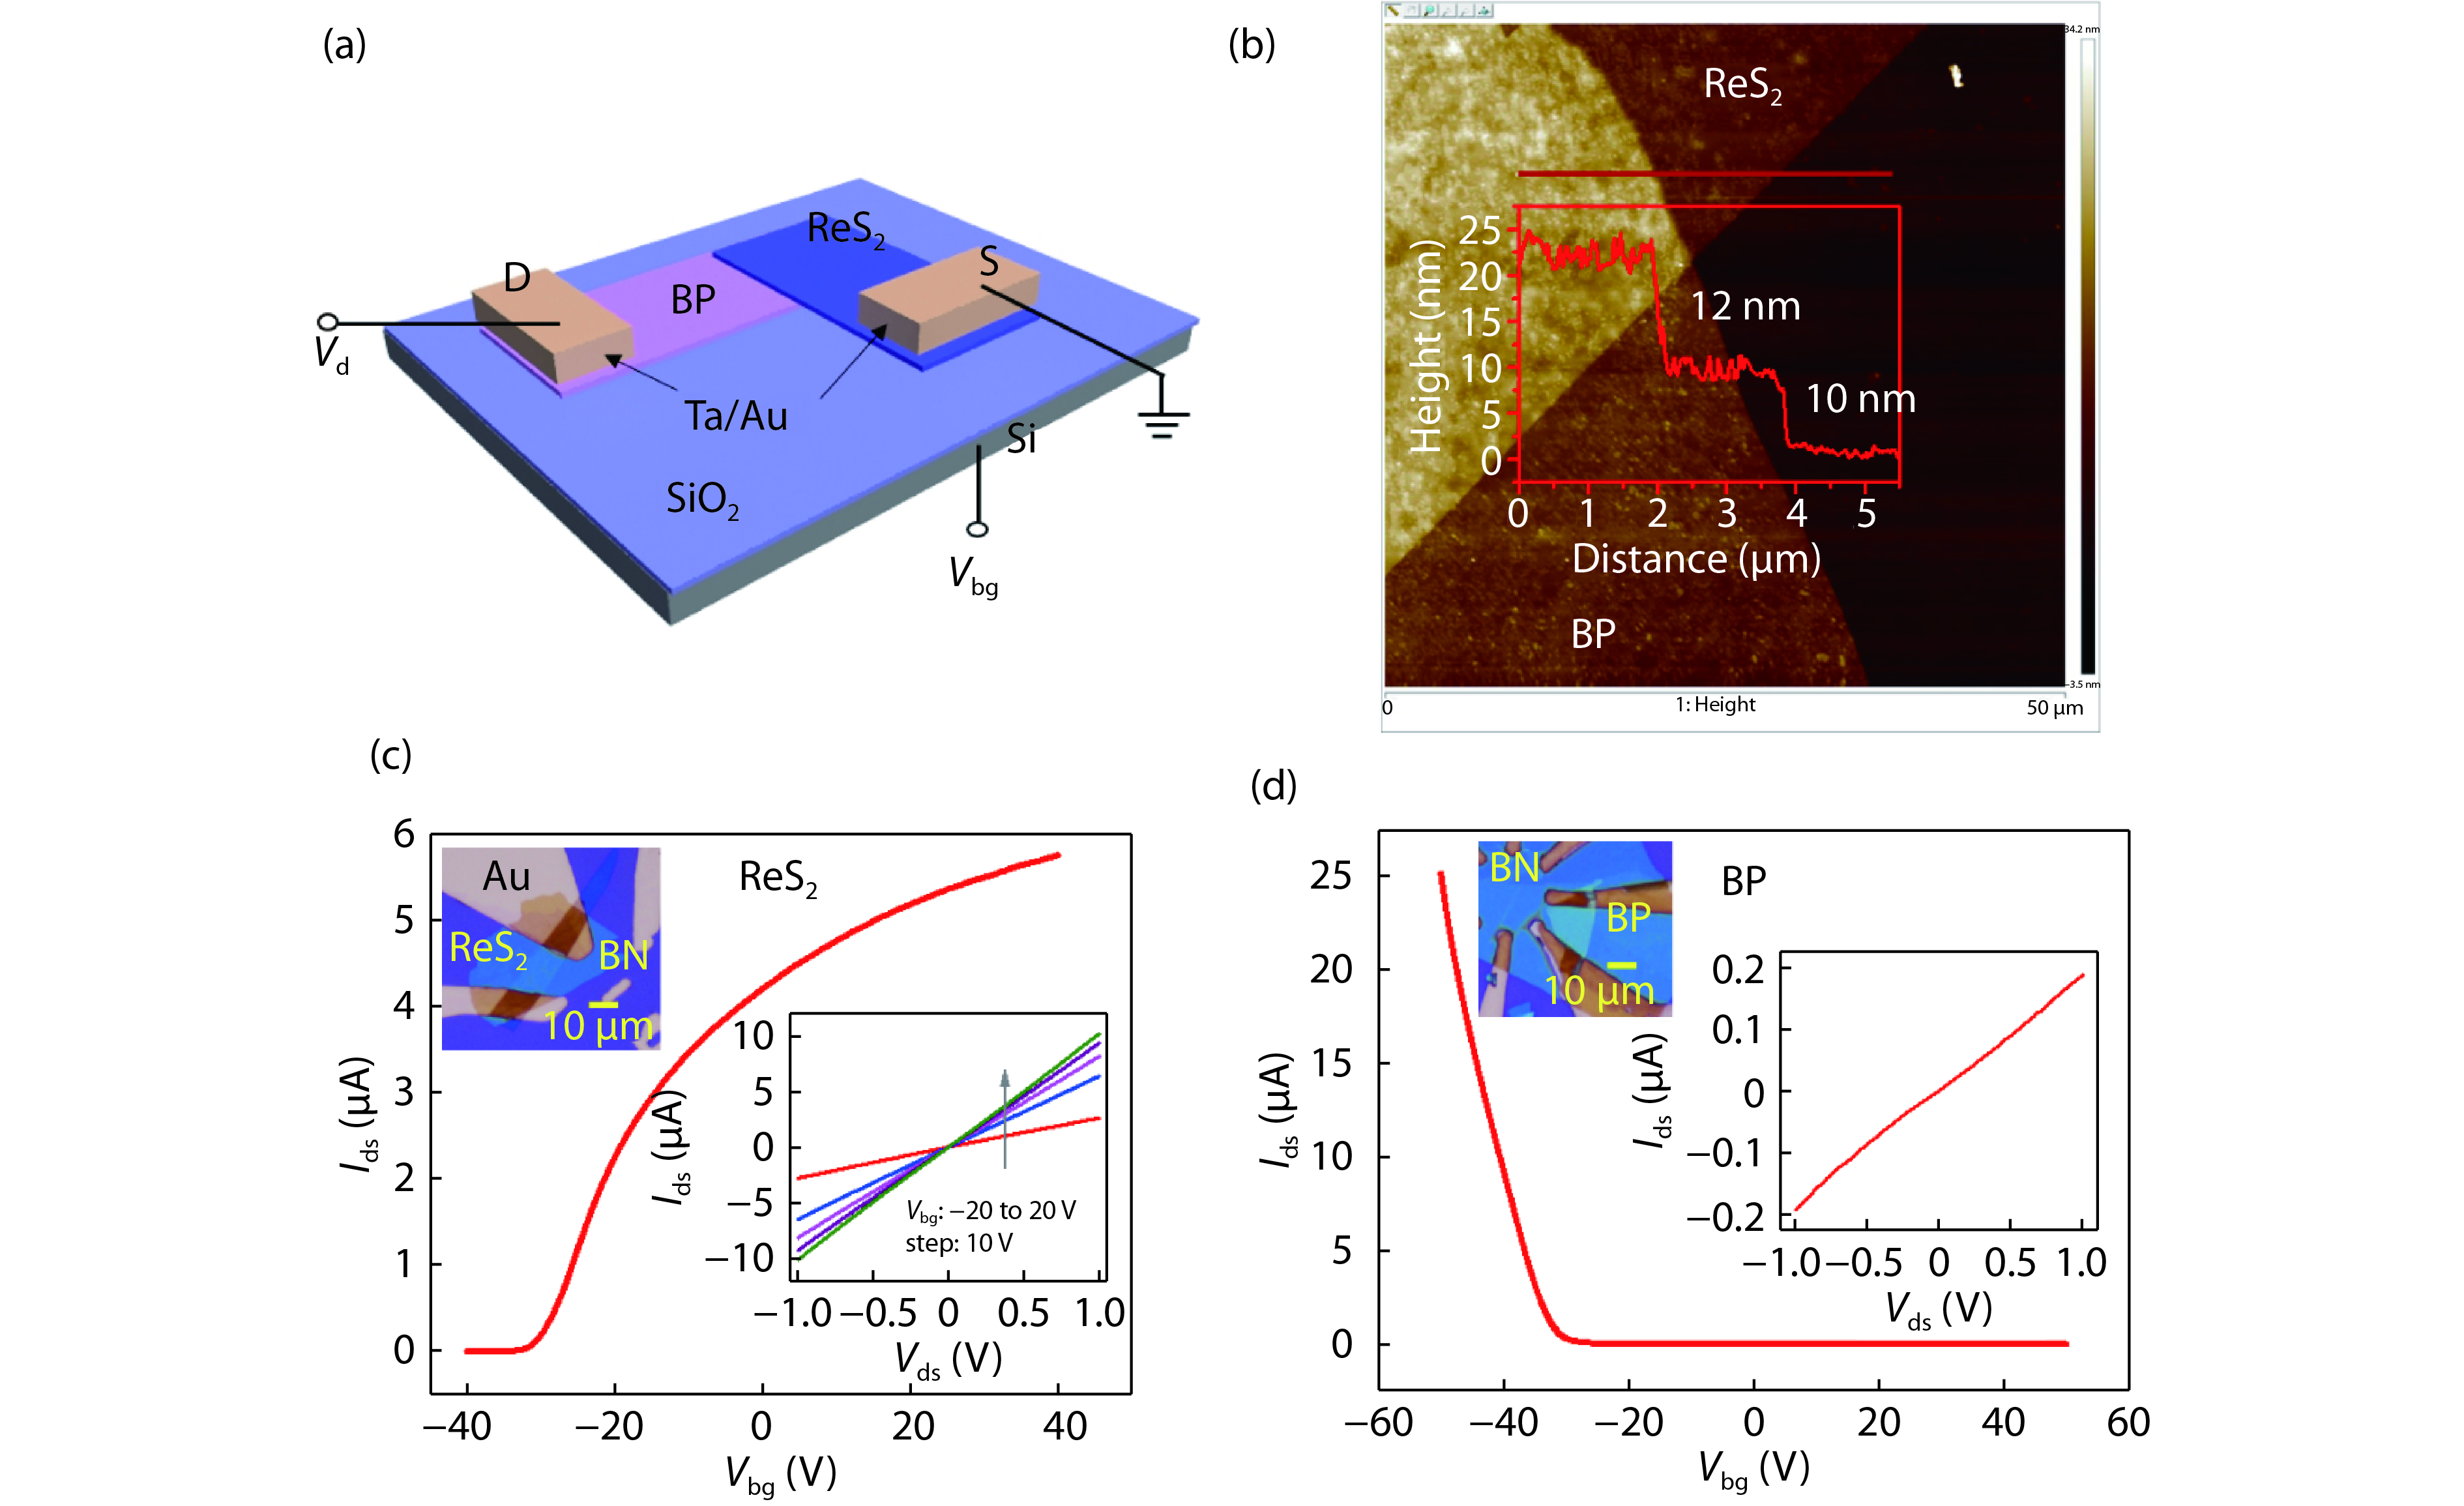 (Color online) (a) Structure schematic of BP/ReS2 heterojunction device. The source electrode (the contact connected to ReS2) is grounded. The drain electrode (the contact connected to BP) is applied a voltage Vd. (b) AFM image of p-BP/n-ReS2 heterojunction device. The inset shows the height profile along the red solid line, indicating the thicknesses of BP (~10 nm) and ReS2 (~12 nm). (c) The transfer curve of the ReS2 FET with Au contact was measured at room temperature and Vds = 0.5 V. Top inset: Optical microscope image of the ReS2 FET. The scale bar is 10 μm. The thickness of the ReS2 is about 6 nm. Bottom inset: Current–voltage (Ids–Vds) curves for different gate voltages (Vbg). (d) Ids as a function of Vbg for BP FET at room temperature and Vds = 0.5 V. Top inset: Optical microscope image of the BP FET. The thickness of the BP is about 10 nm. Bottom inset: Ids–Vds curve of the BP FET.